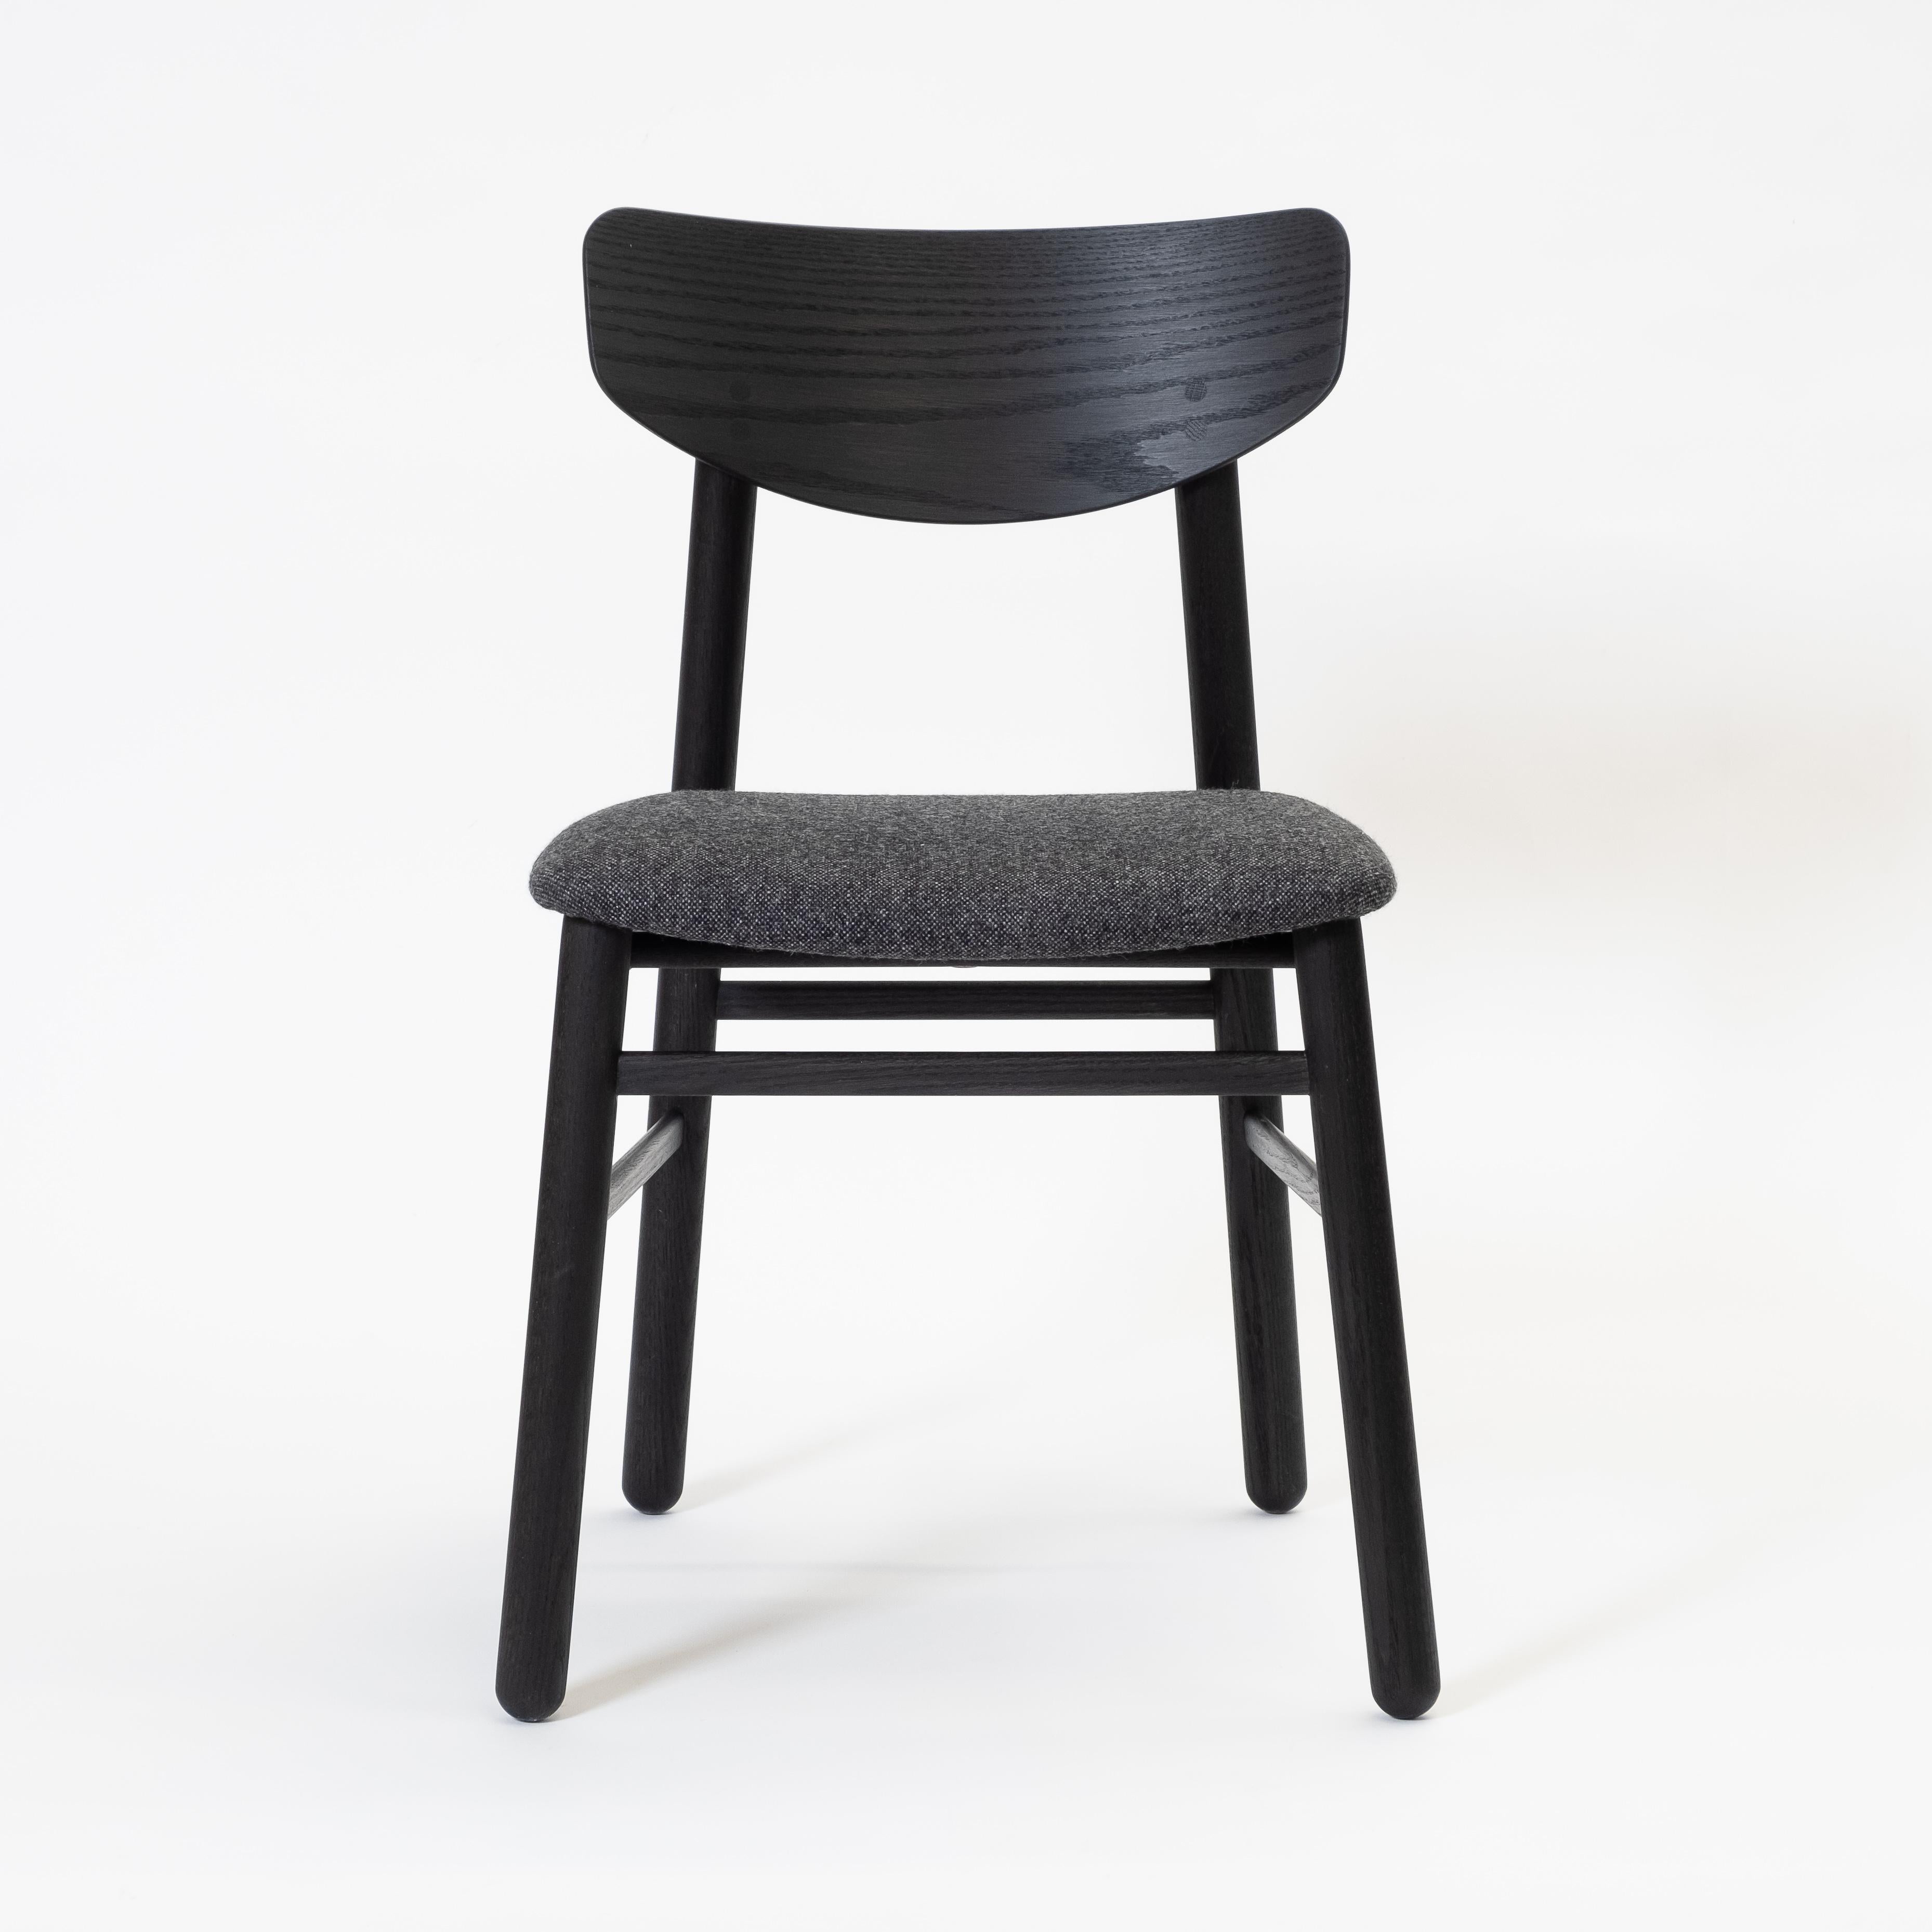 Modern Dining Chair in Solid Blackened Oak with Wool Seat In New Condition For Sale In Ottawa, CA